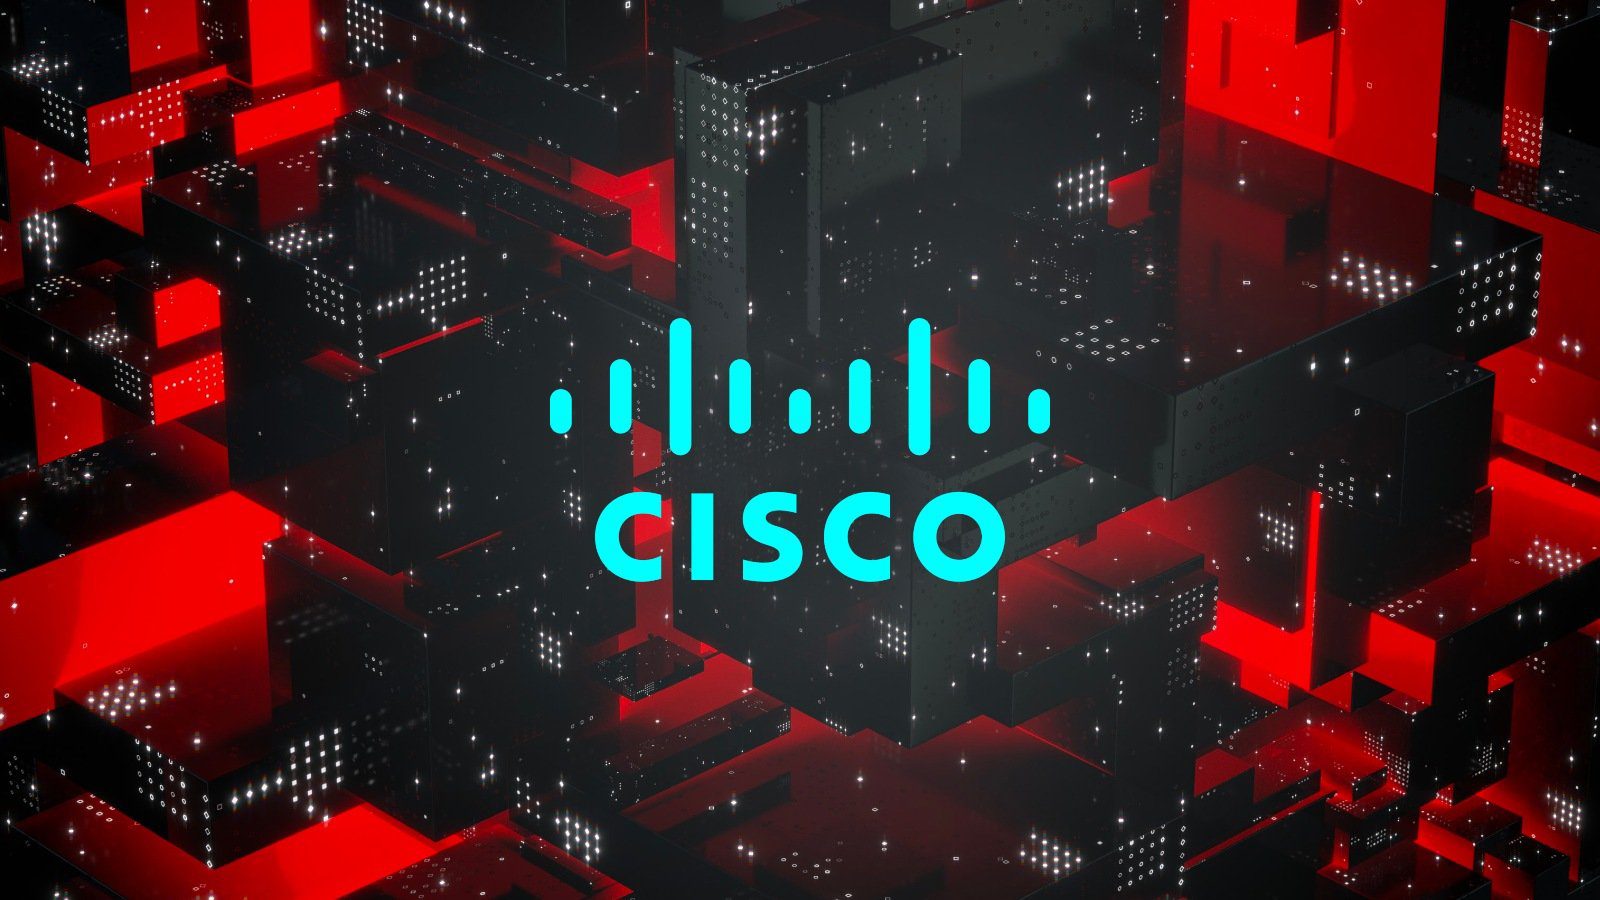 Cisco phone adapters vulnerable to RCE attacks, no fix available – Source: www.bleepingcomputer.com